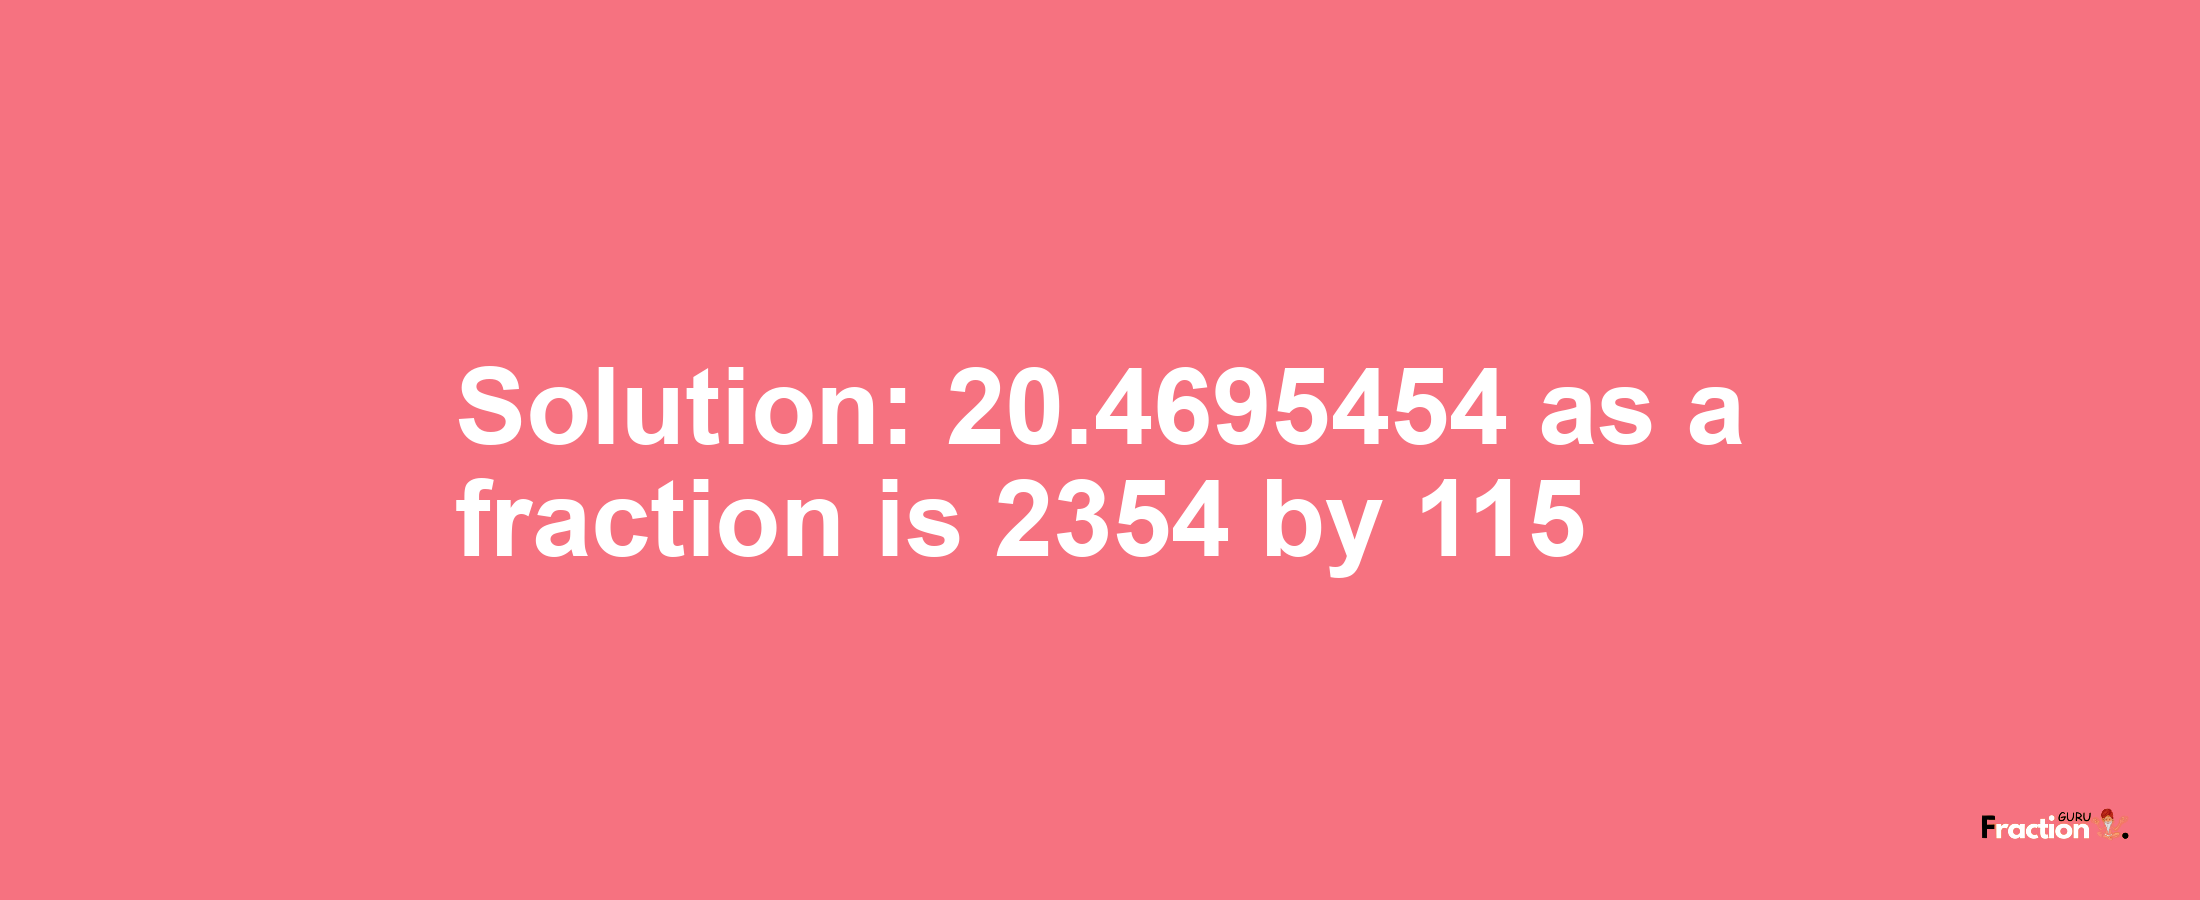 Solution:20.4695454 as a fraction is 2354/115